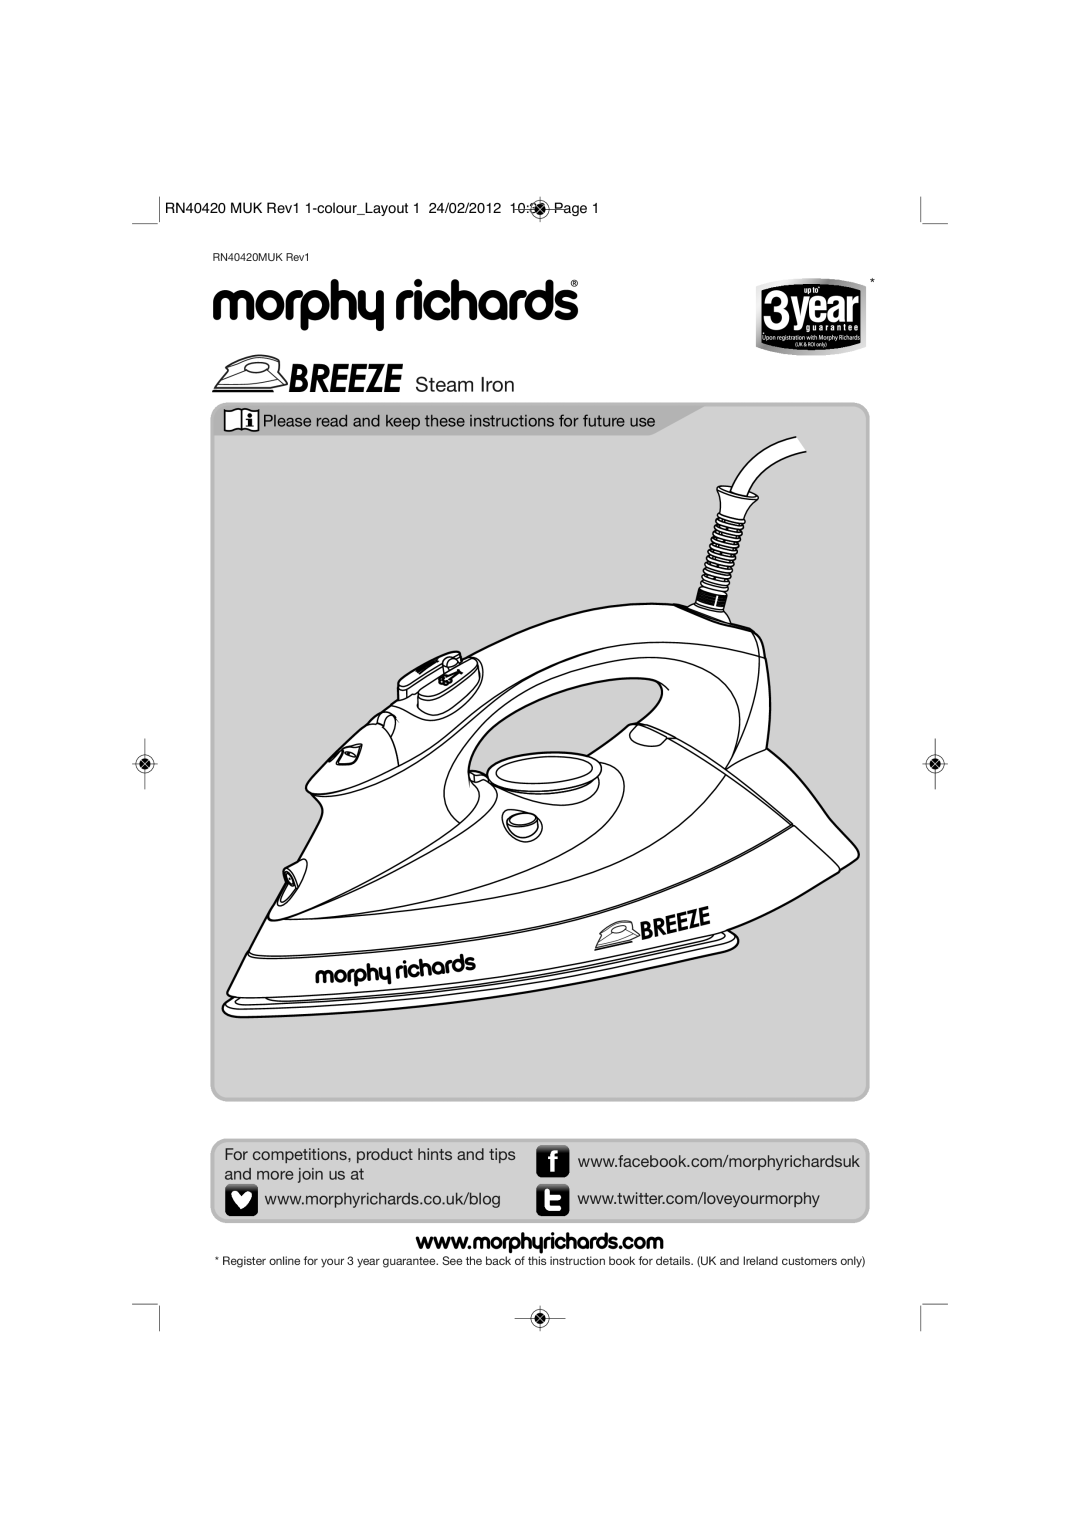 Morphy Richards RN40420MUK manual Steam Iron, Please read and keep these instructions for future use, and more join us at 